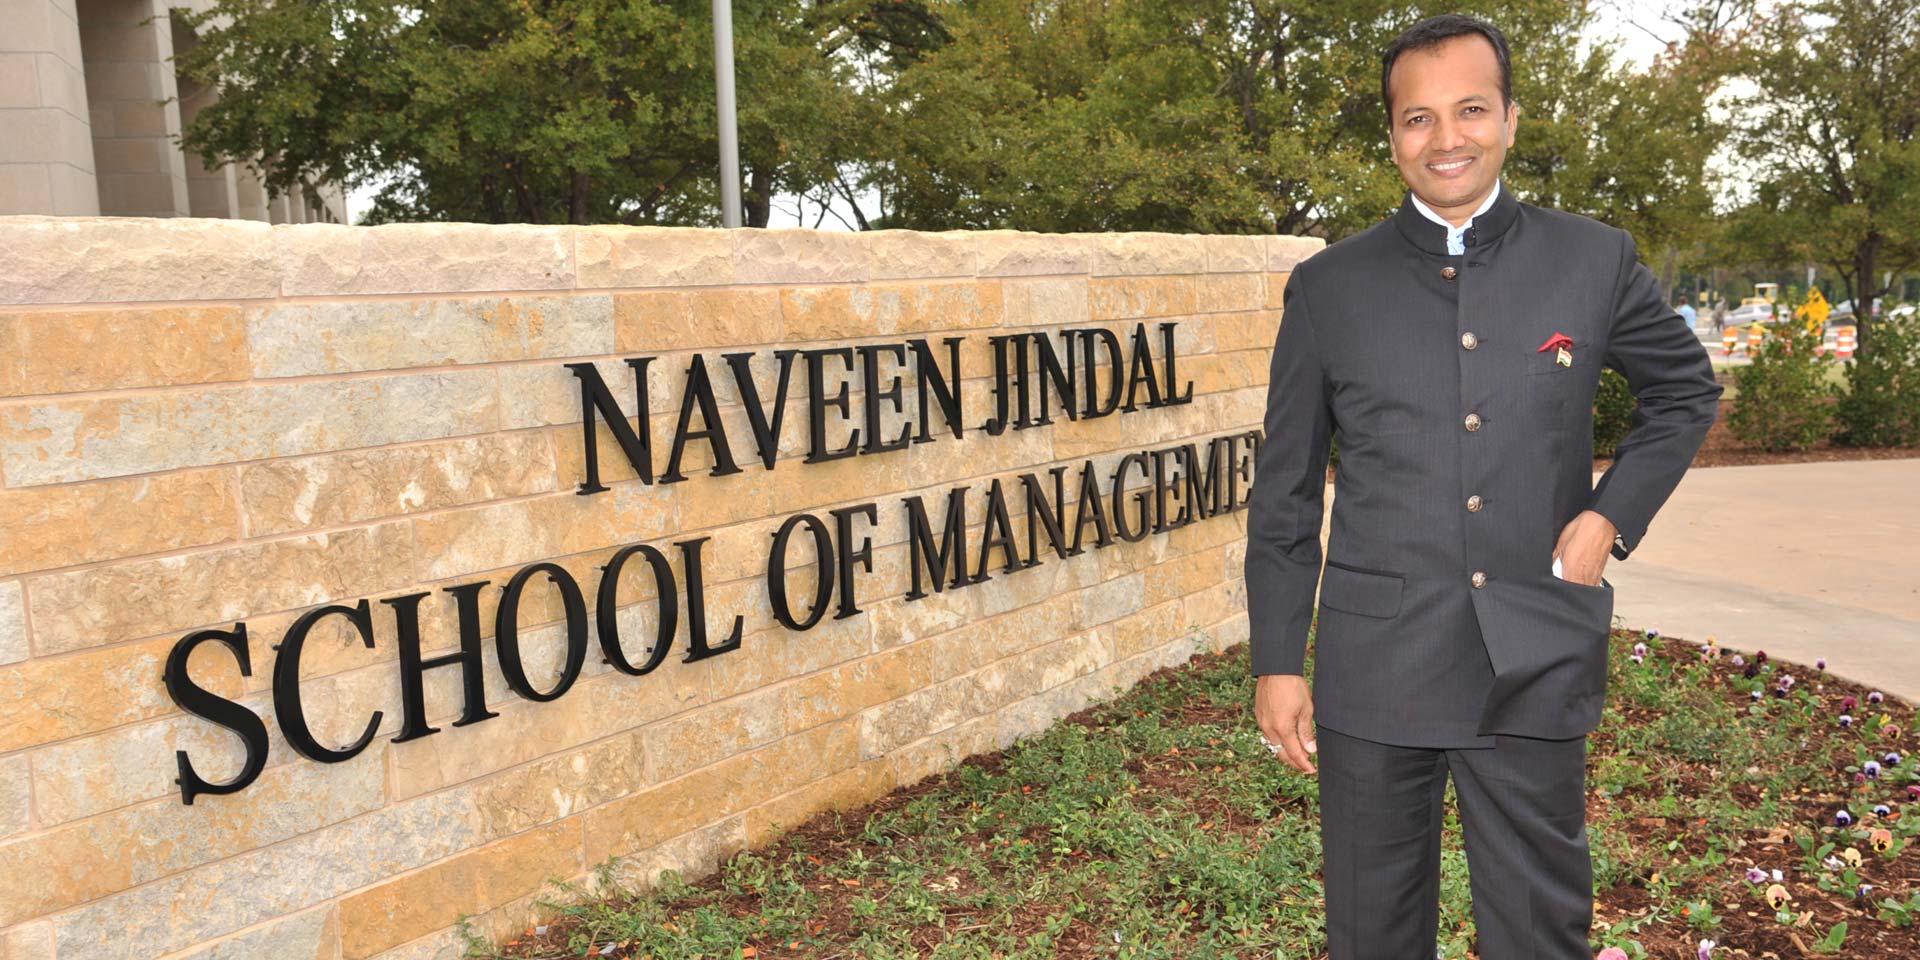 Naveen Jindal with the sign of the business school that bears his name at UT Dallas